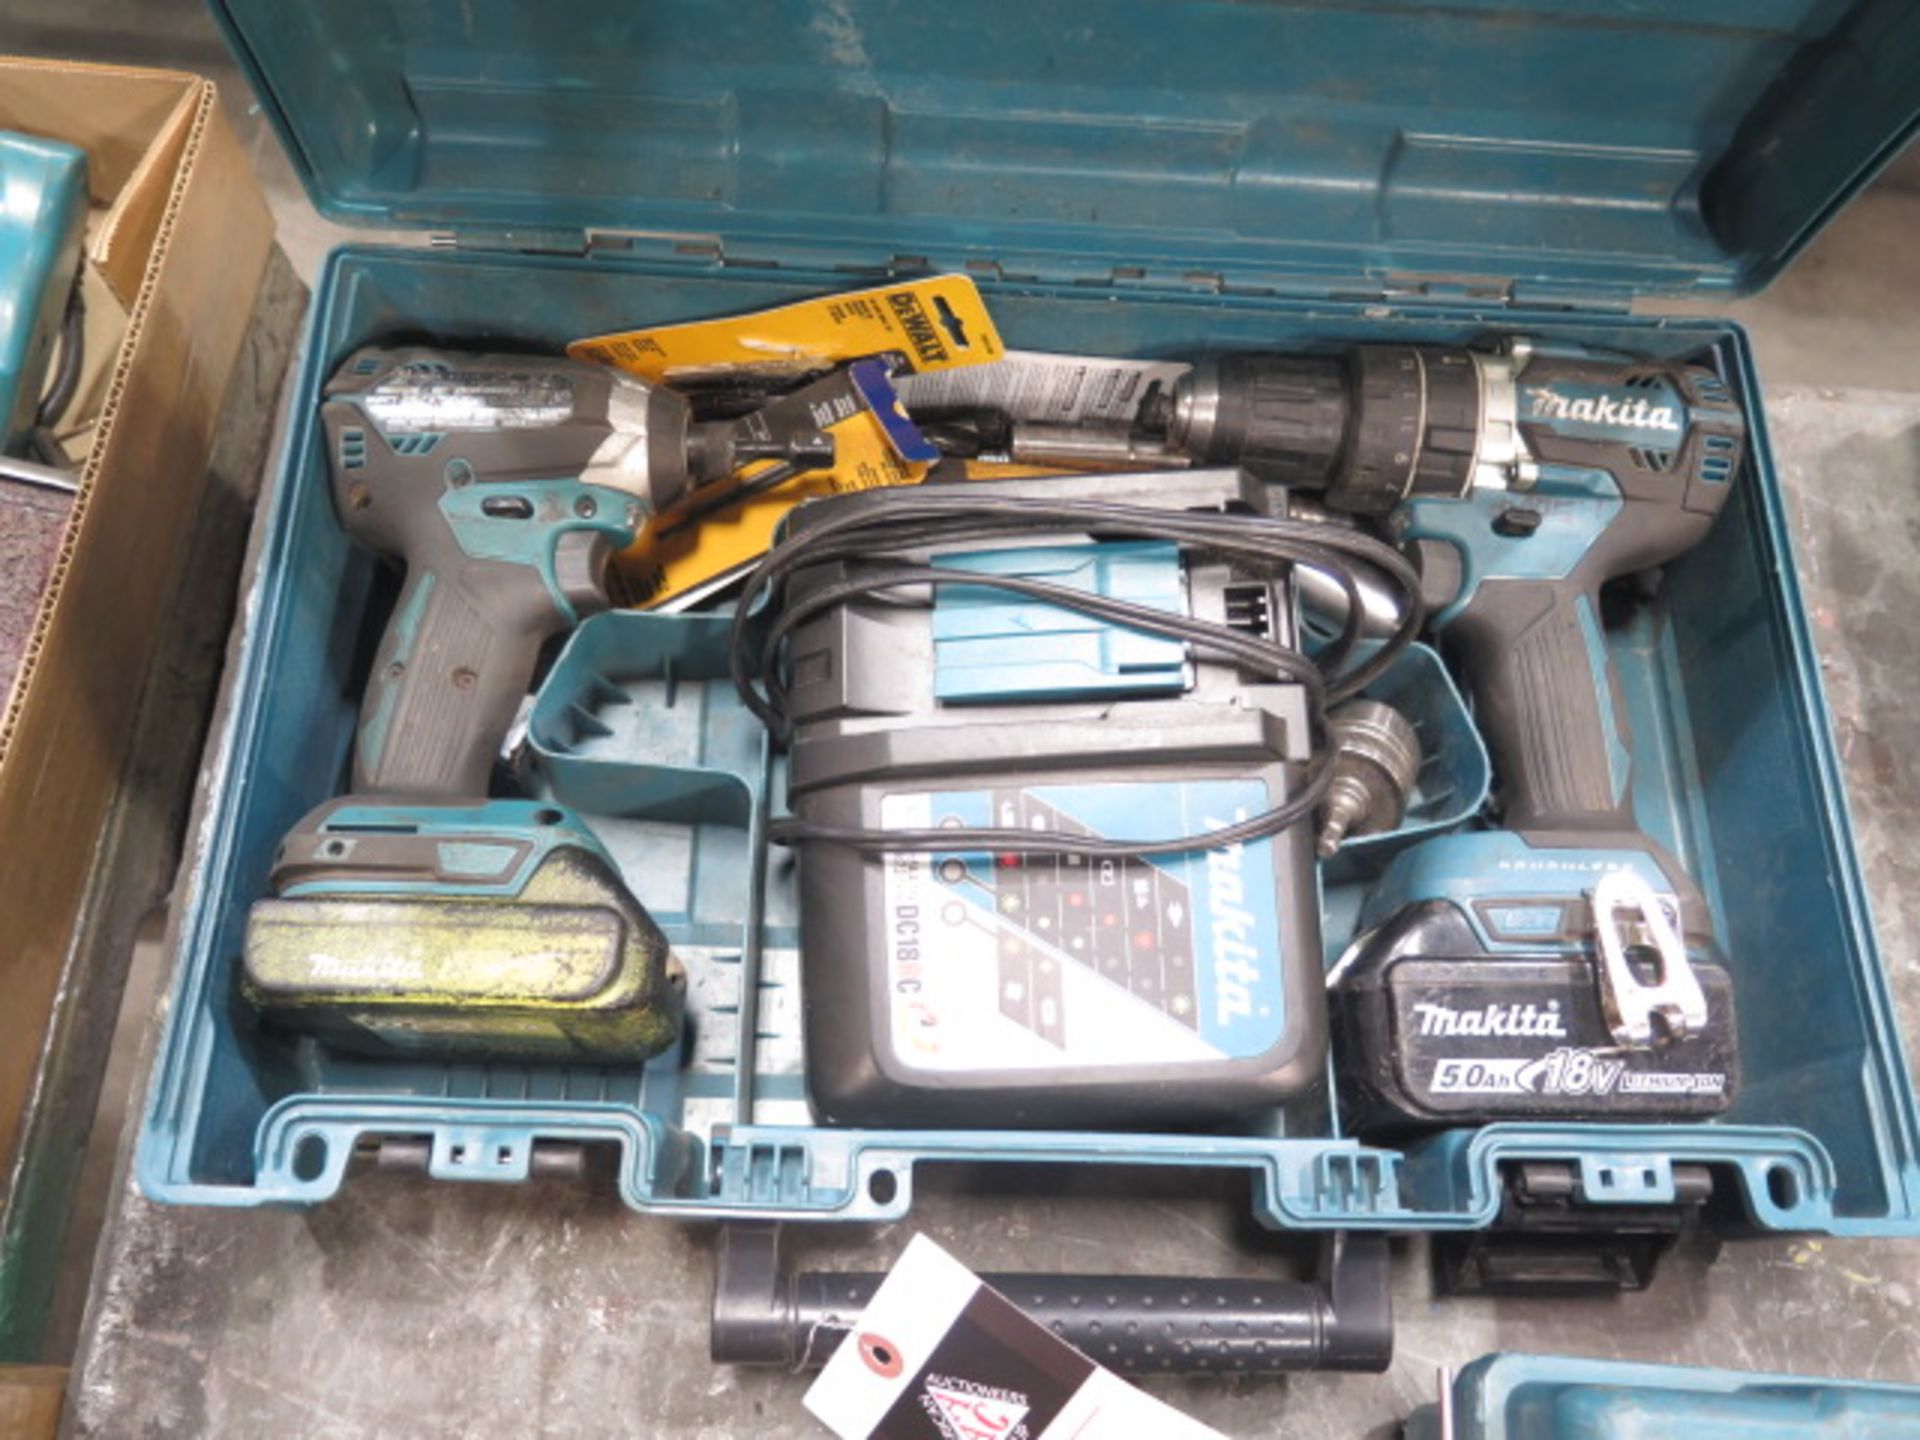 Makita 18V Cordless Drill and Nut Driver Set w/ Charger (SOLD AS-IS - NO WARRANTY) - Image 2 of 5